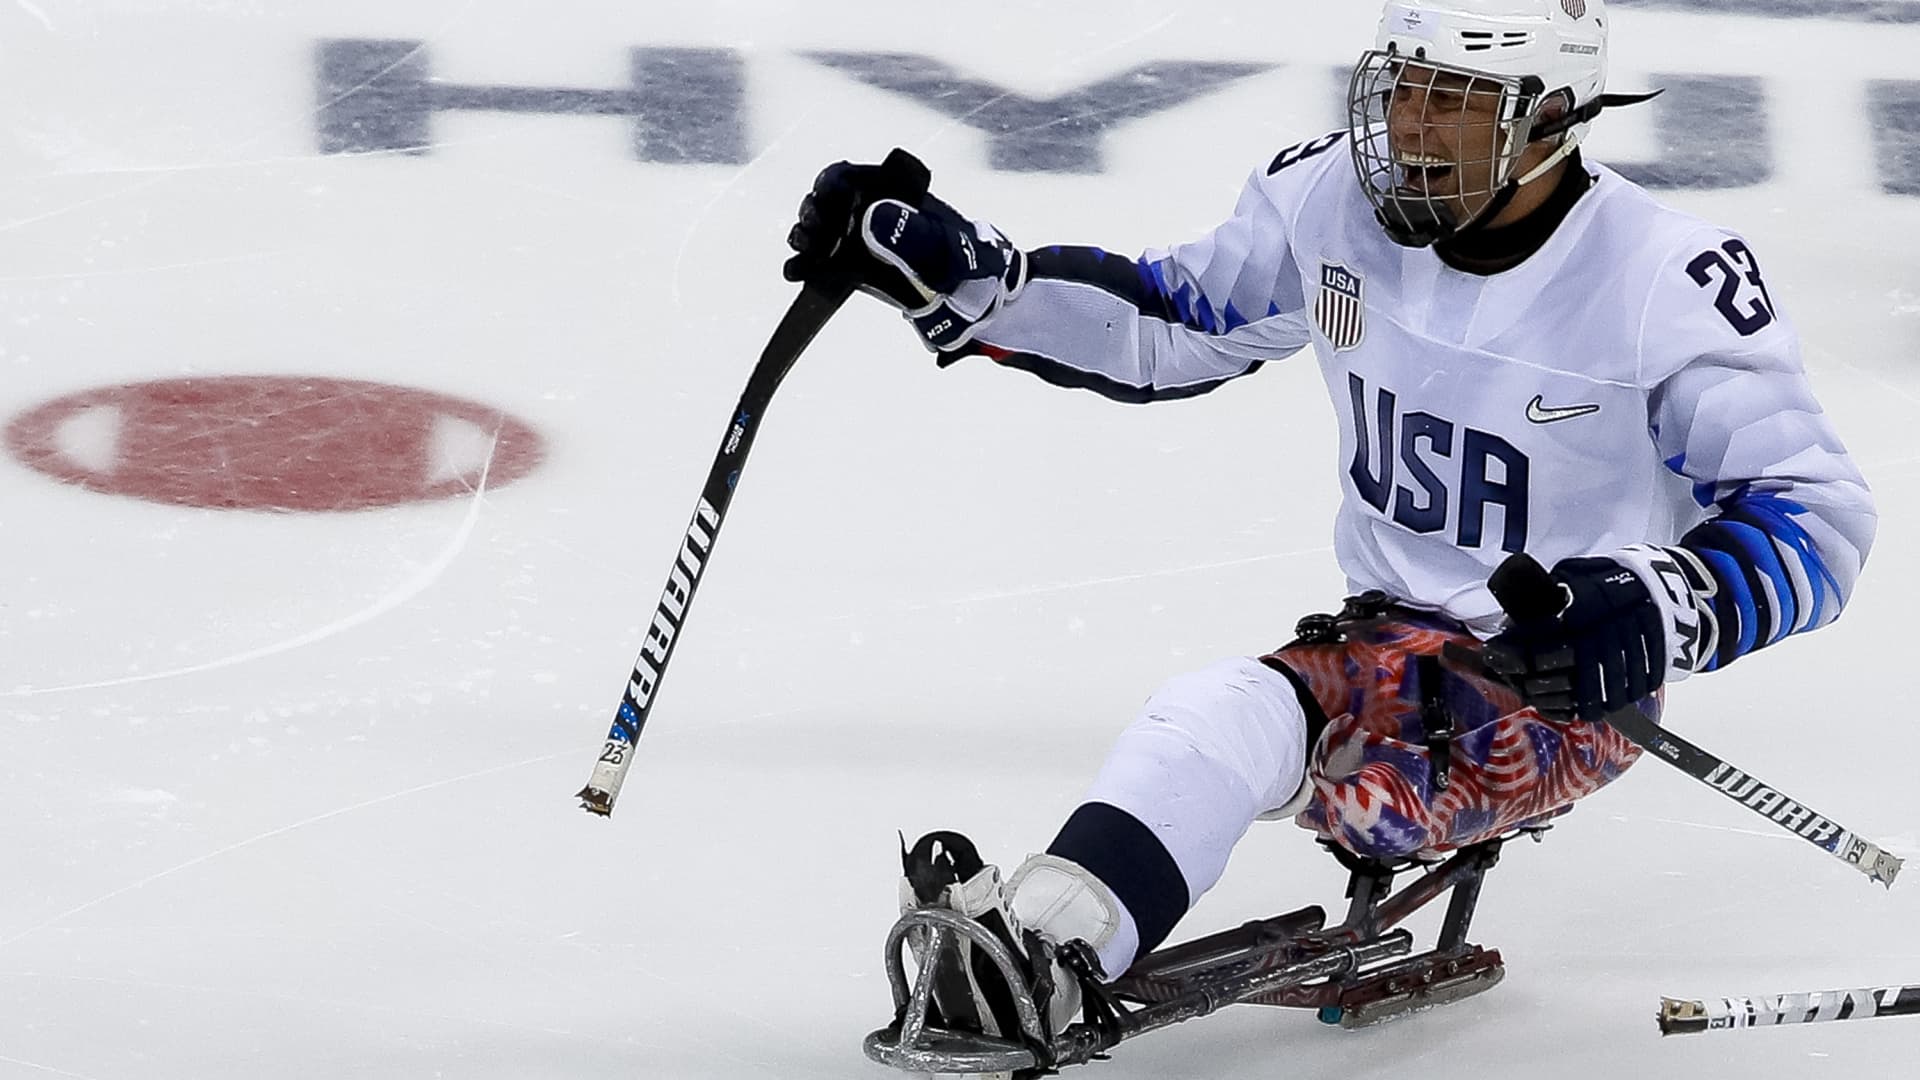 Rico Roman of the United States celebrates winning the gold medal over Canada in the Ice Hockey gold medal game between United States and Canada at the PyeongChang 2018 Paralympic Games.